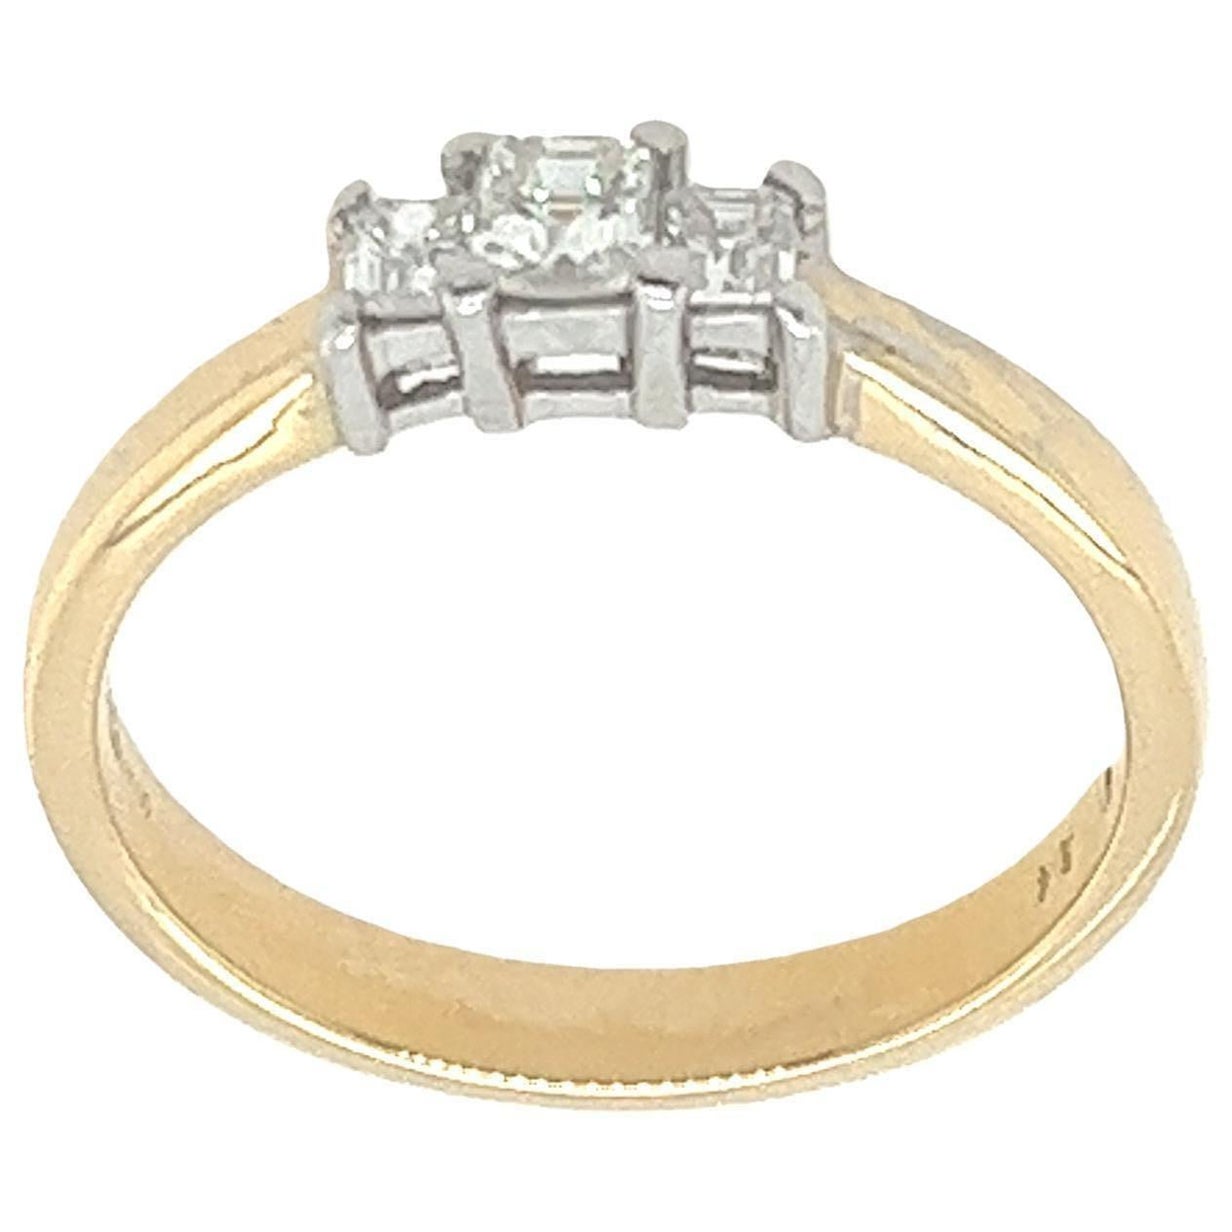 3-Stone Diamond Ring, Set With 0.35ct of Diamonds In 18ct Yellow & White Gold